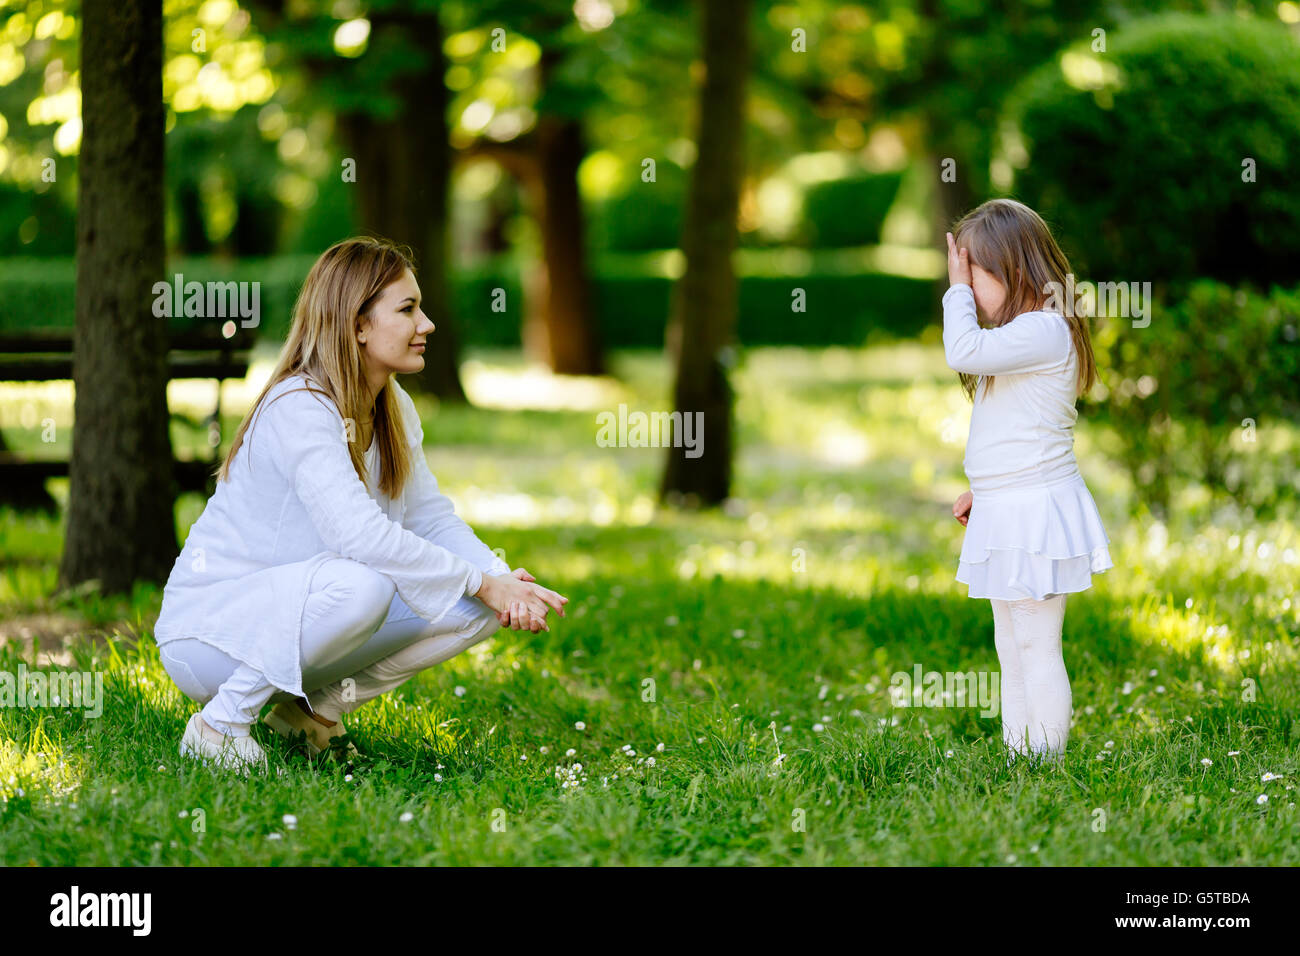 Mother scolding child and she covers face feeling ashamed Stock Photo